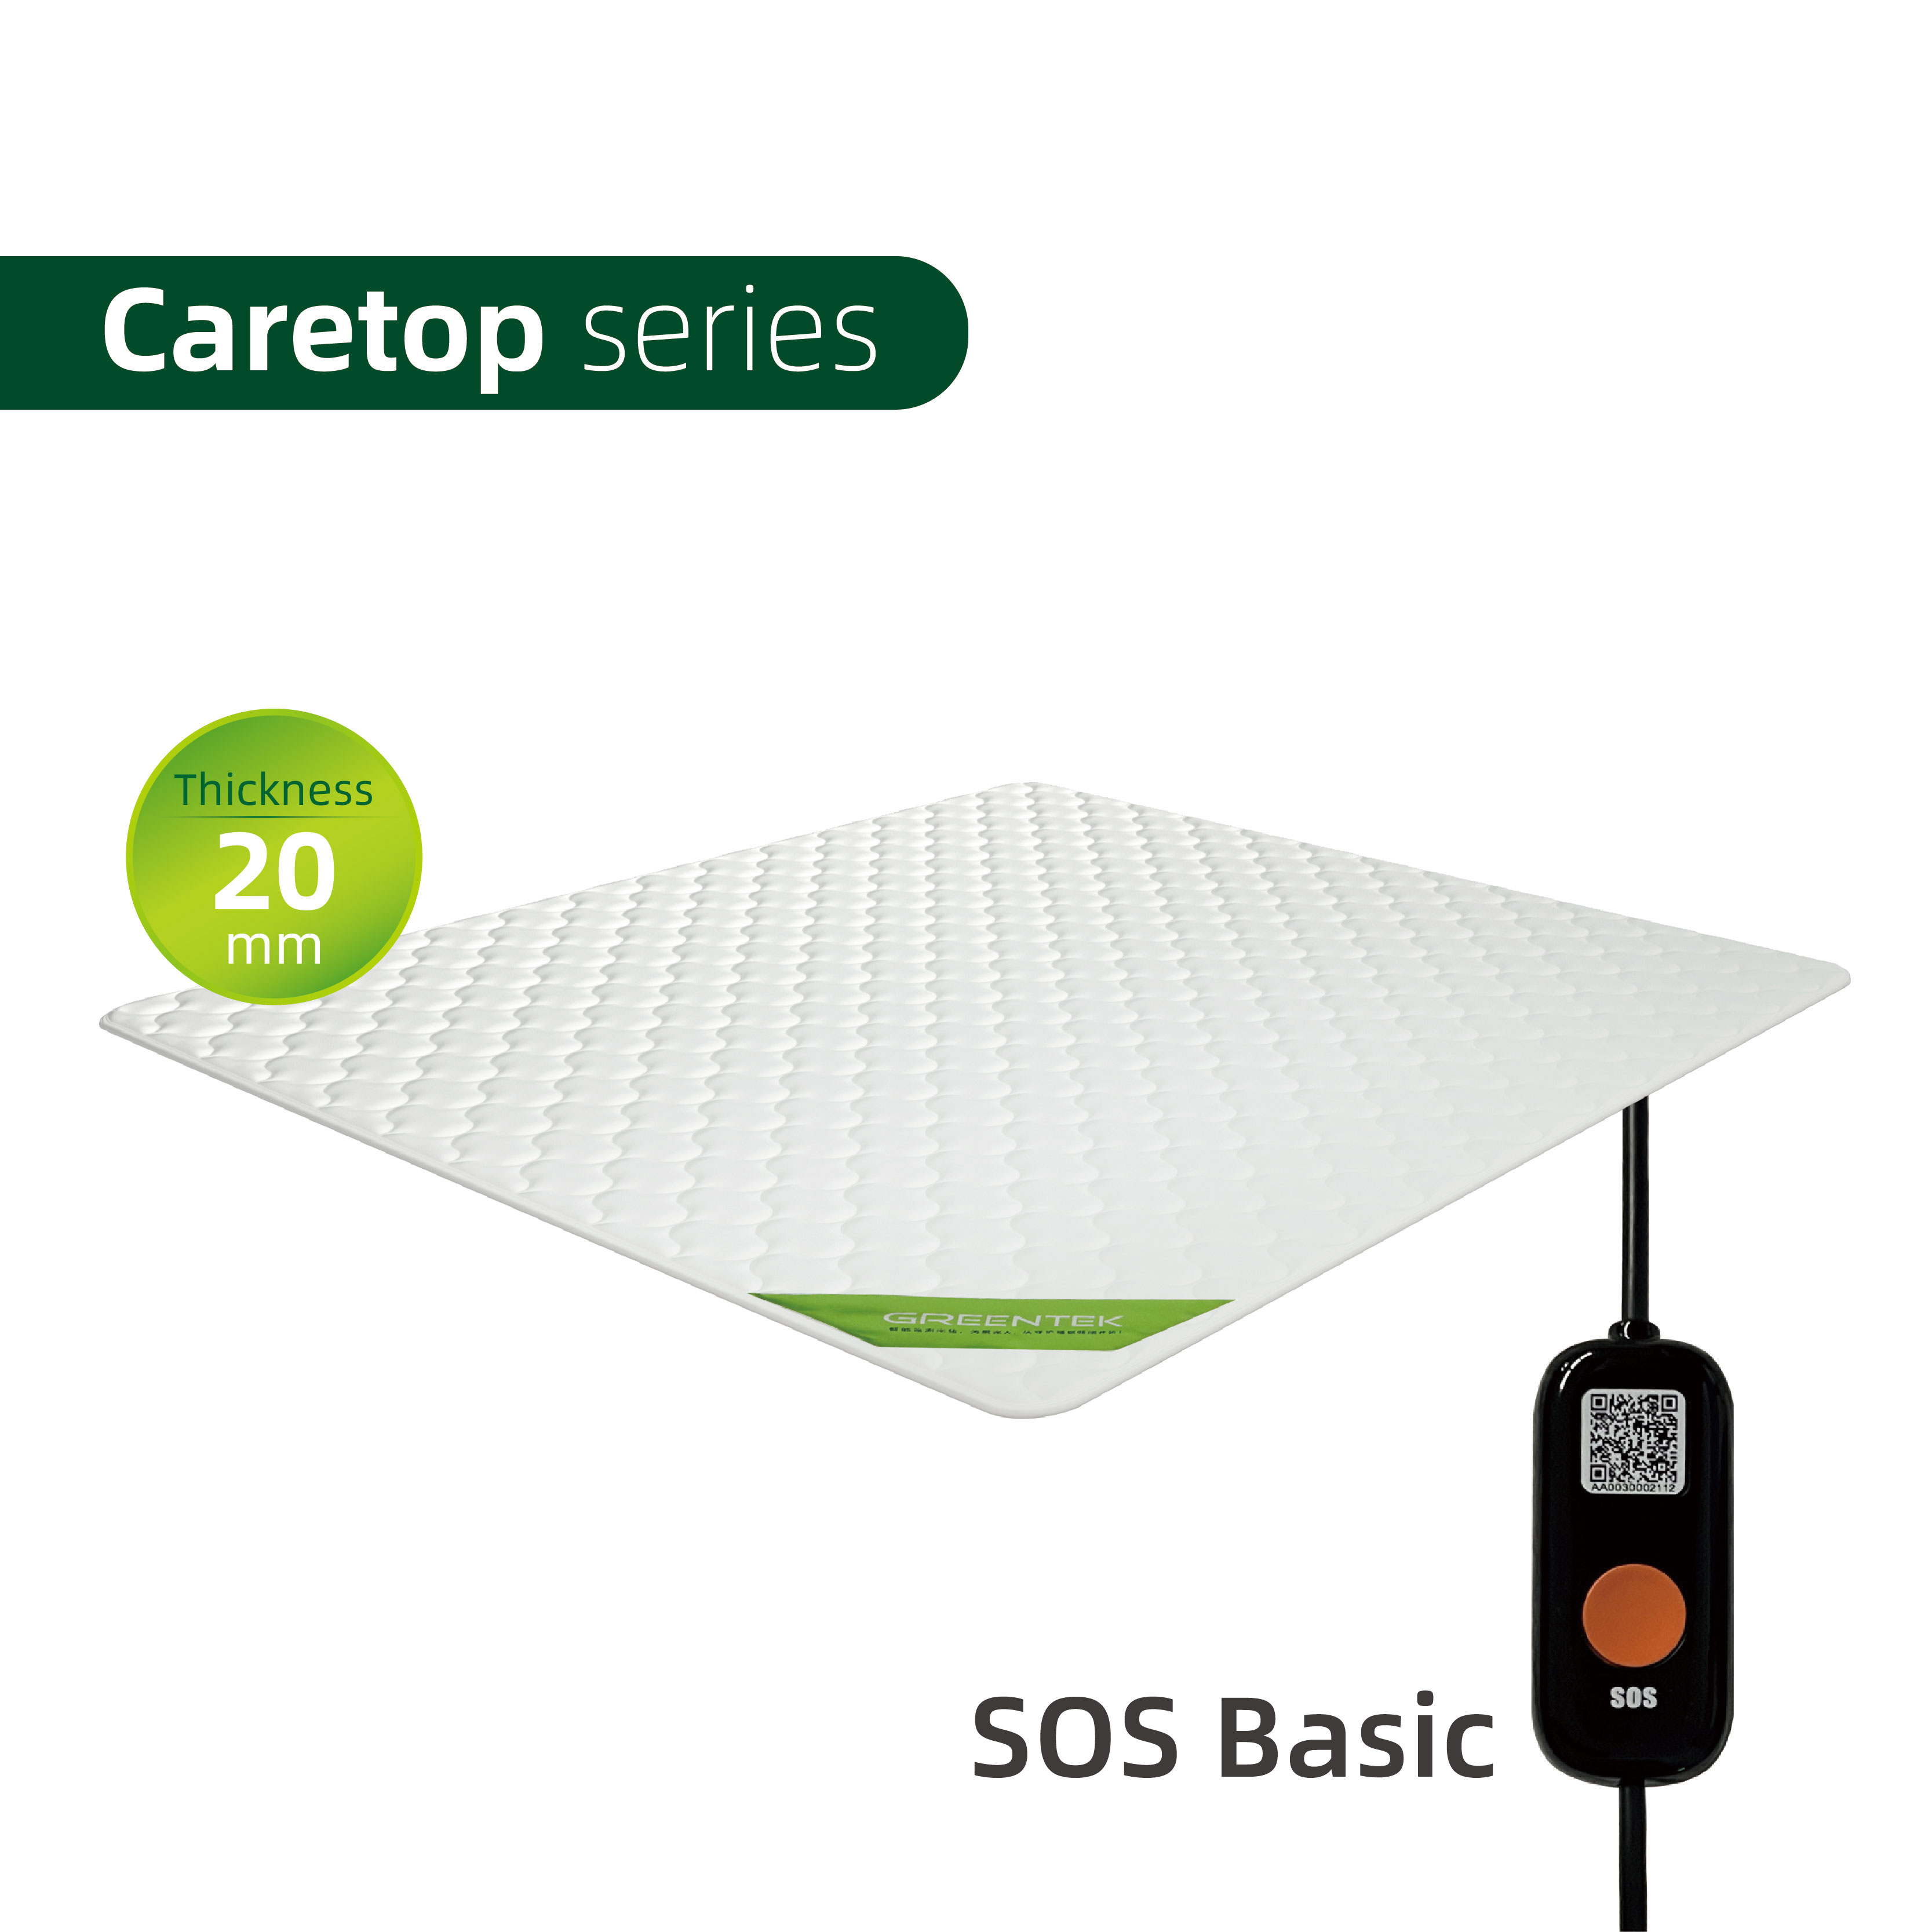 Caretop Tracking Mattress with SOS button